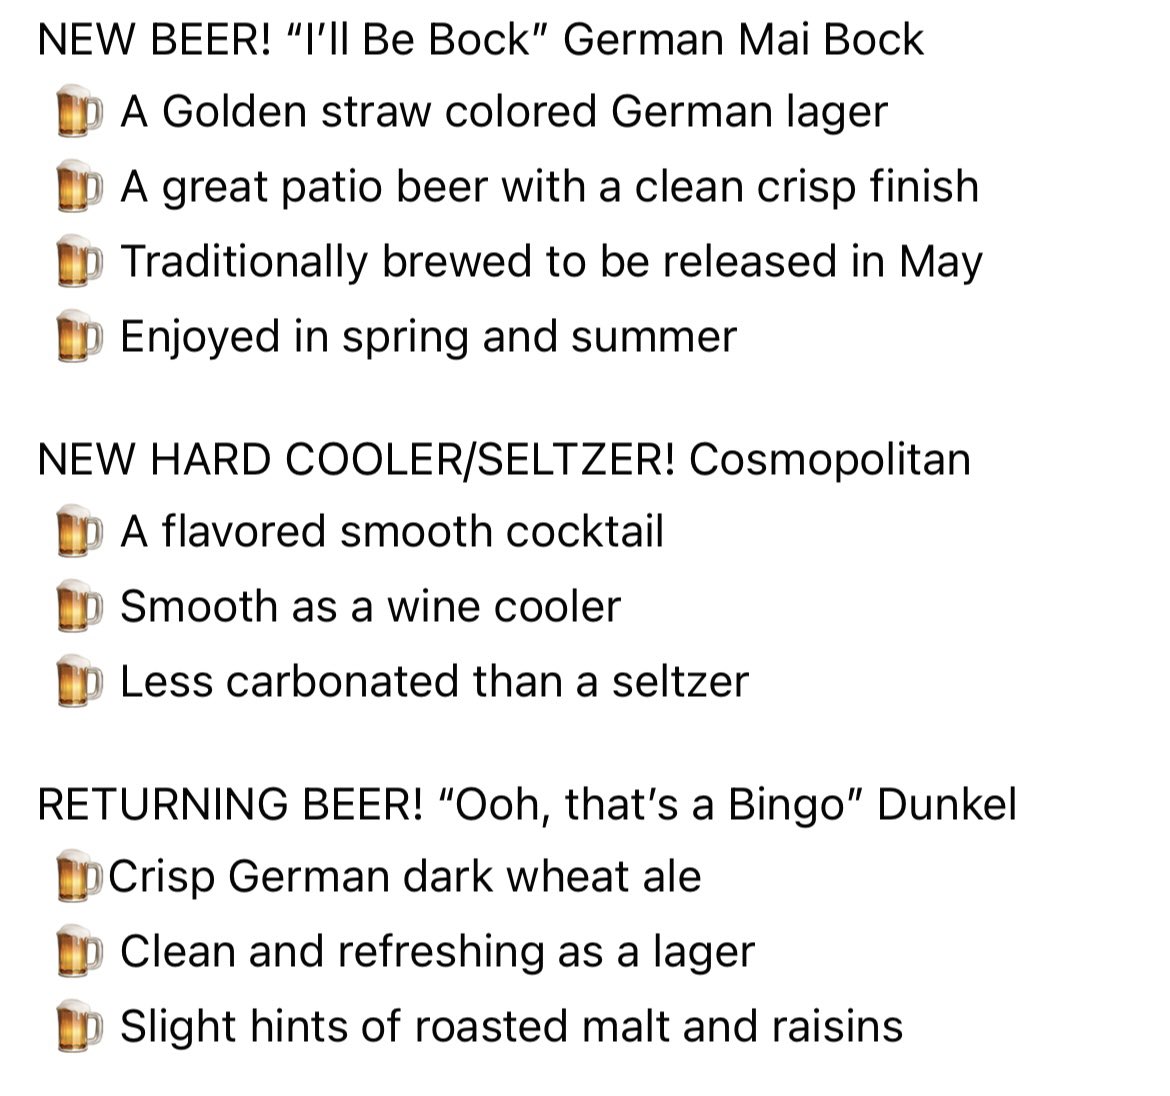 On this day 5 years ago, we celebrated the groundbreaking of 3rd Act. 

Therefore, it is only fitting that today we are celebrating the addition of two drinks to our lineup and the return of a fan favorite! ON TAP NOW……

#mnbeer #mnbrewery #newbeeralert #maibock #dunkelweizen